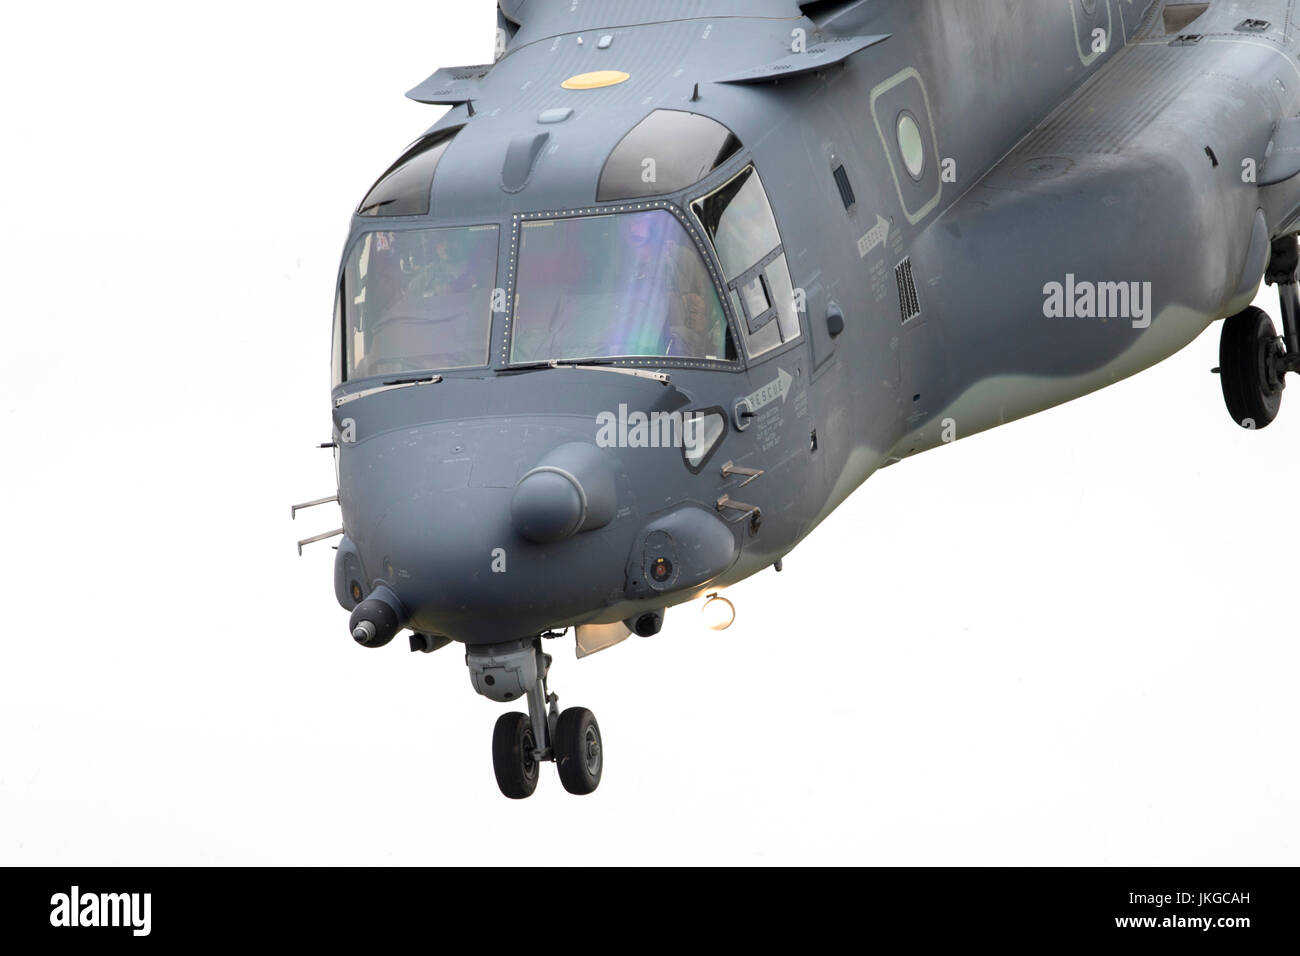 United States Marine Corps Bell Boeing V-22 Osprey avion militaire à rotors basculants RIAT 2017 Banque D'Images